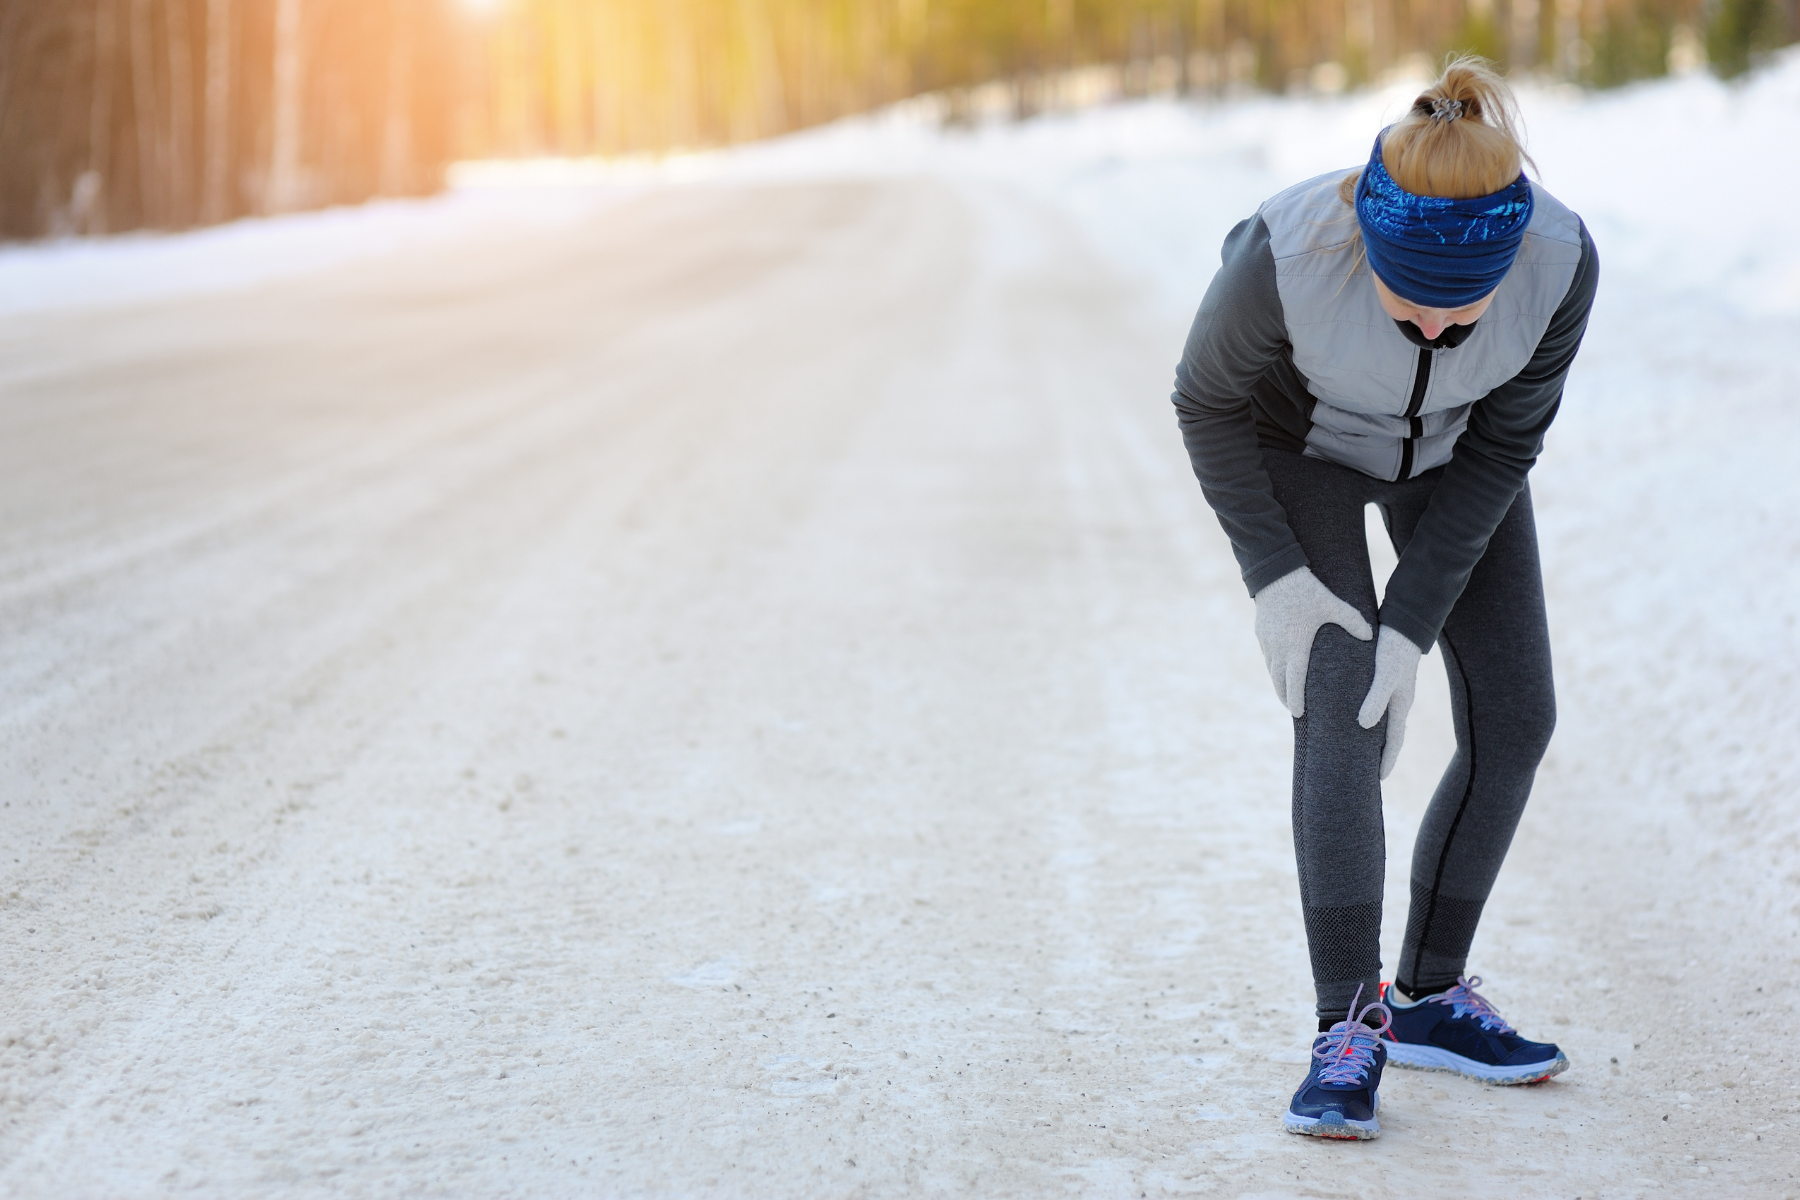 Runner clutching her knee on a snowy road